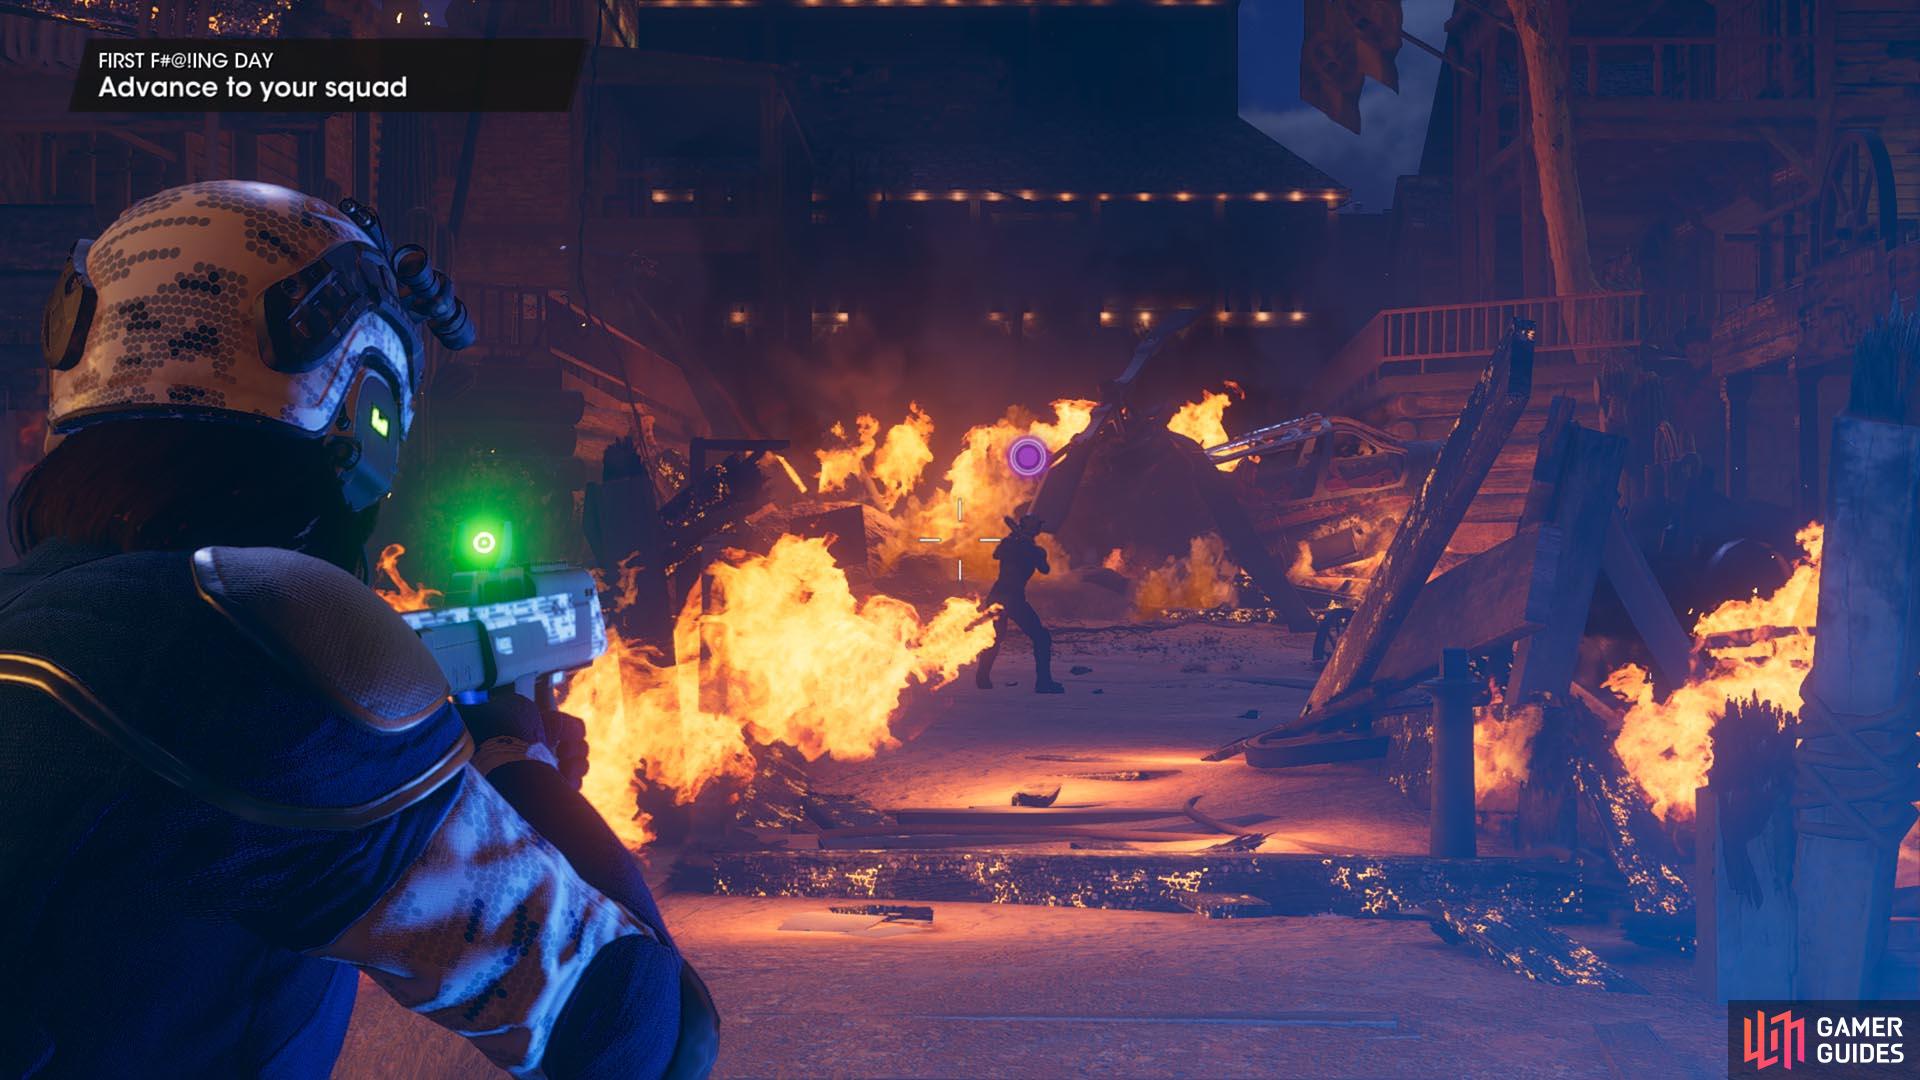 Ooh, pretty fire. You will be seeing a lot of that in Saints Row's first mission.